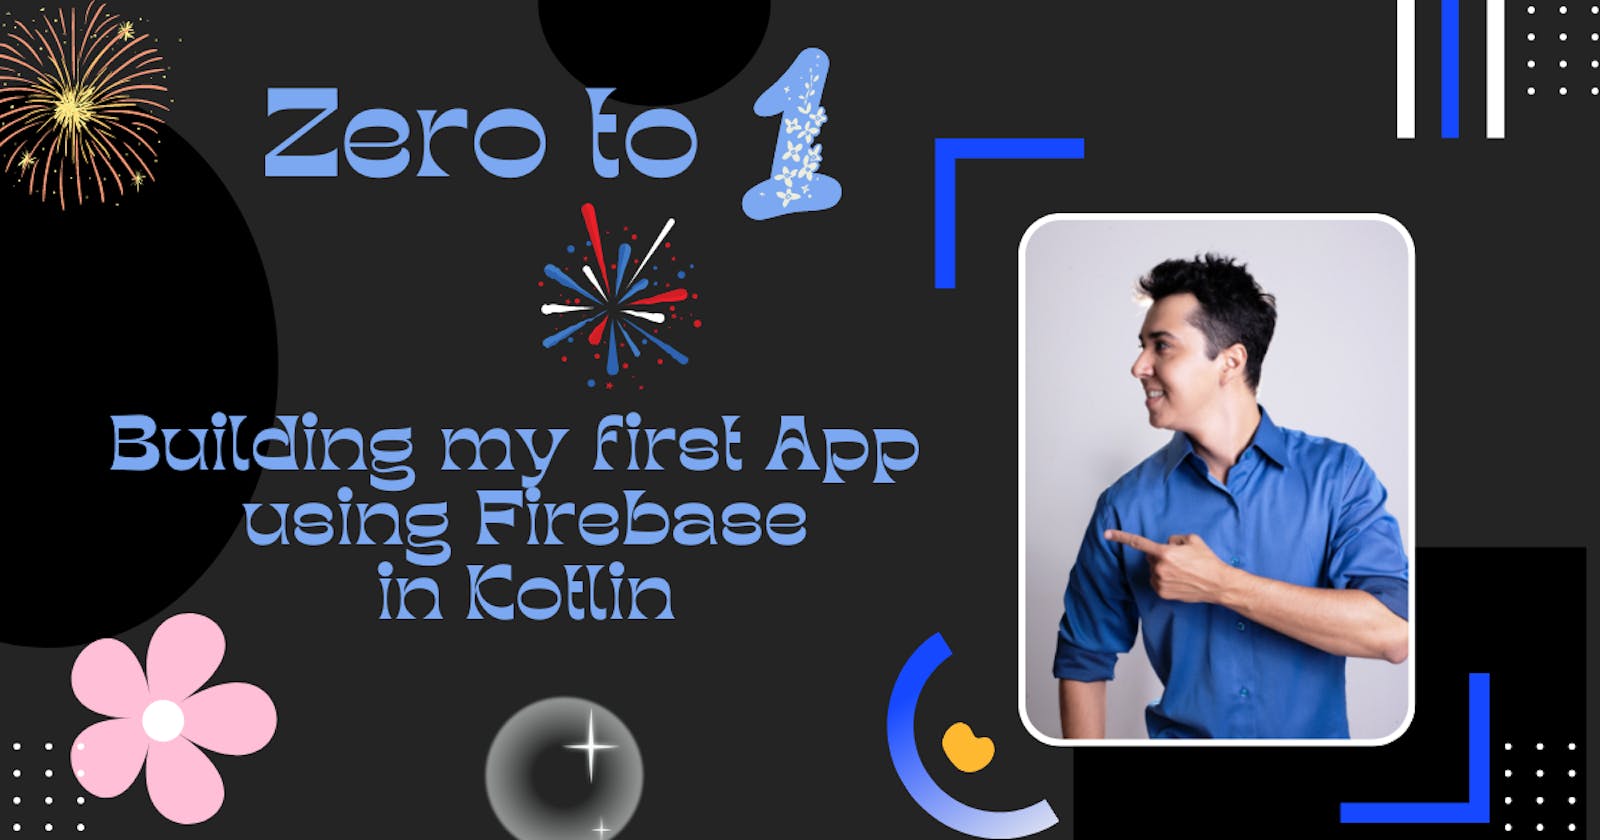 Zero to one.
 Building my first App
 using firebase in Kotlin.